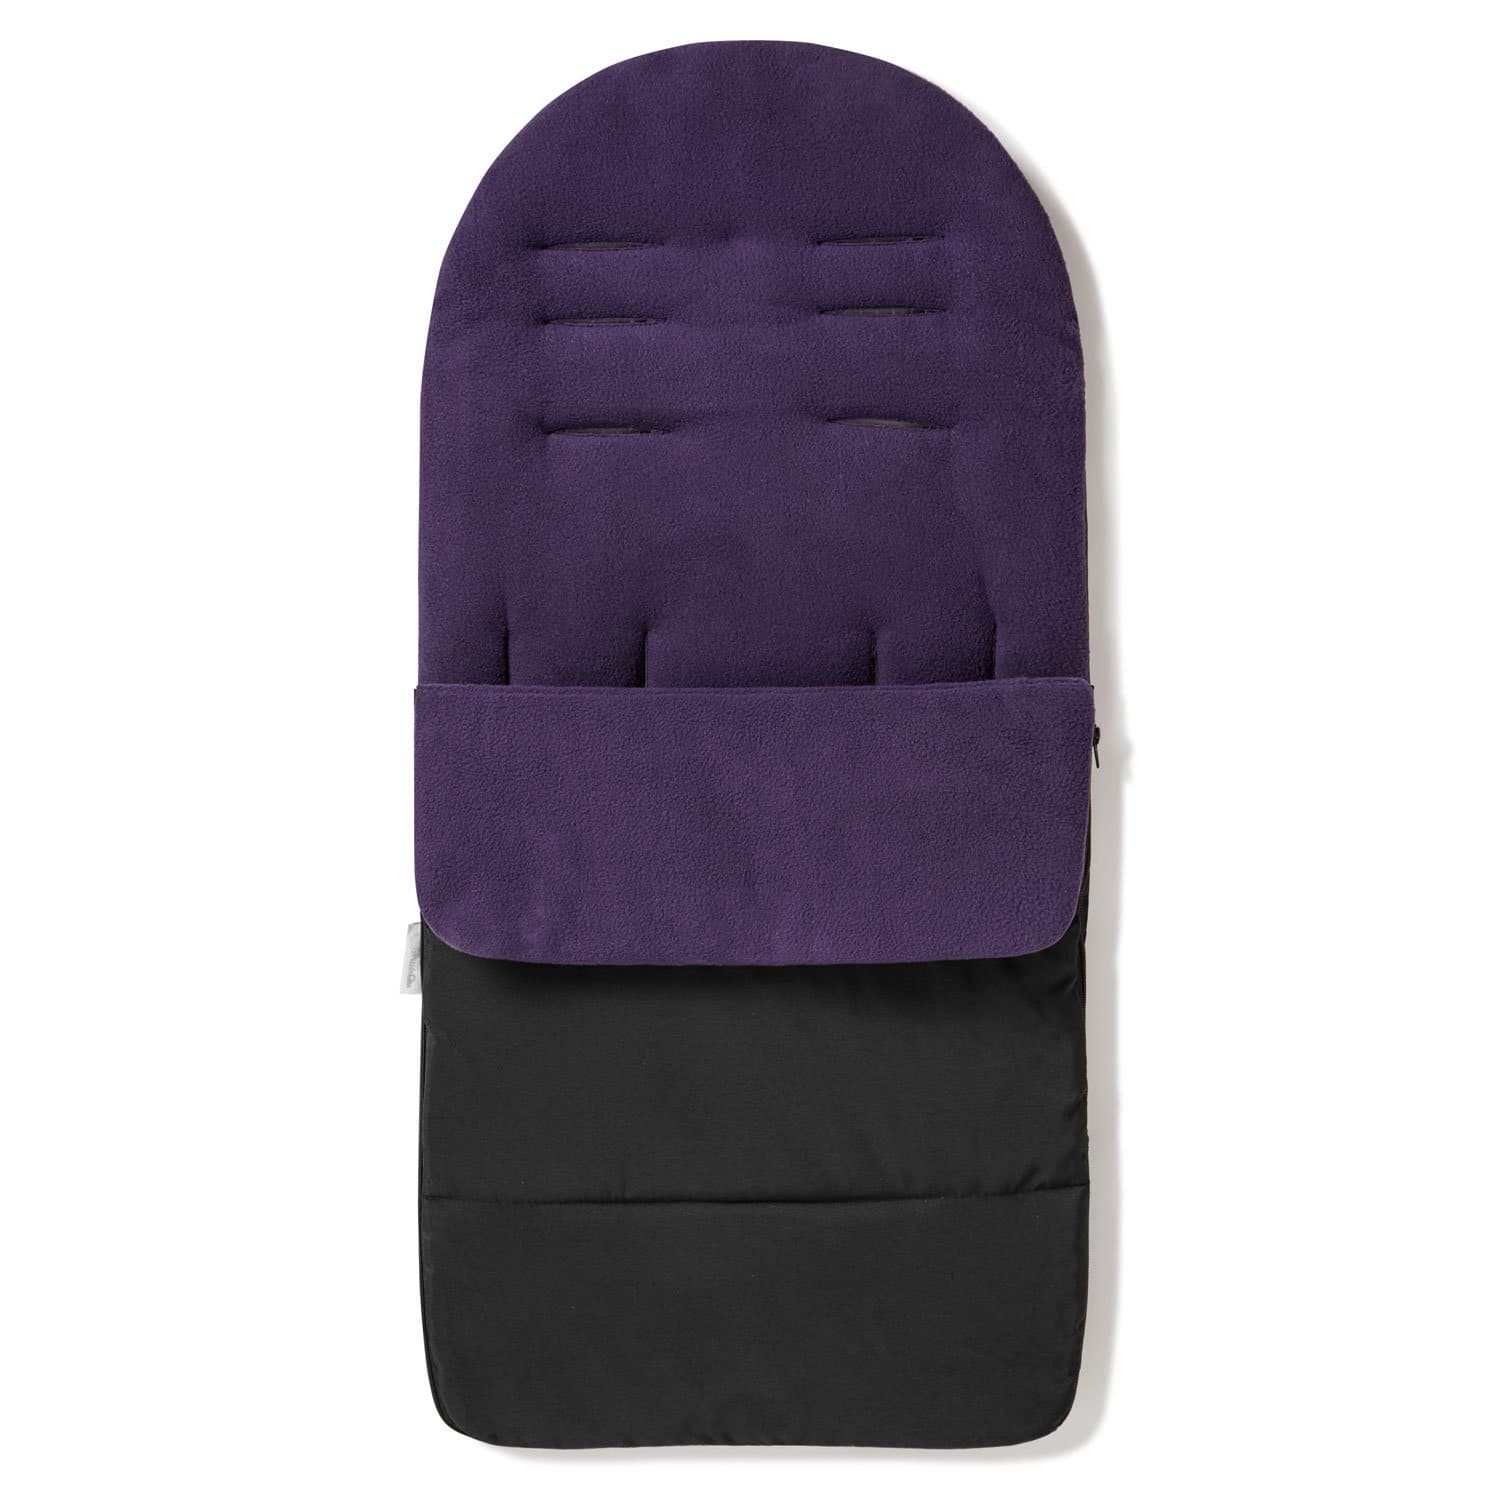 Premium Footmuff / Cosy Toes Compatible with BabiesRus - Plum Purple / Fits All Models | For Your Little One